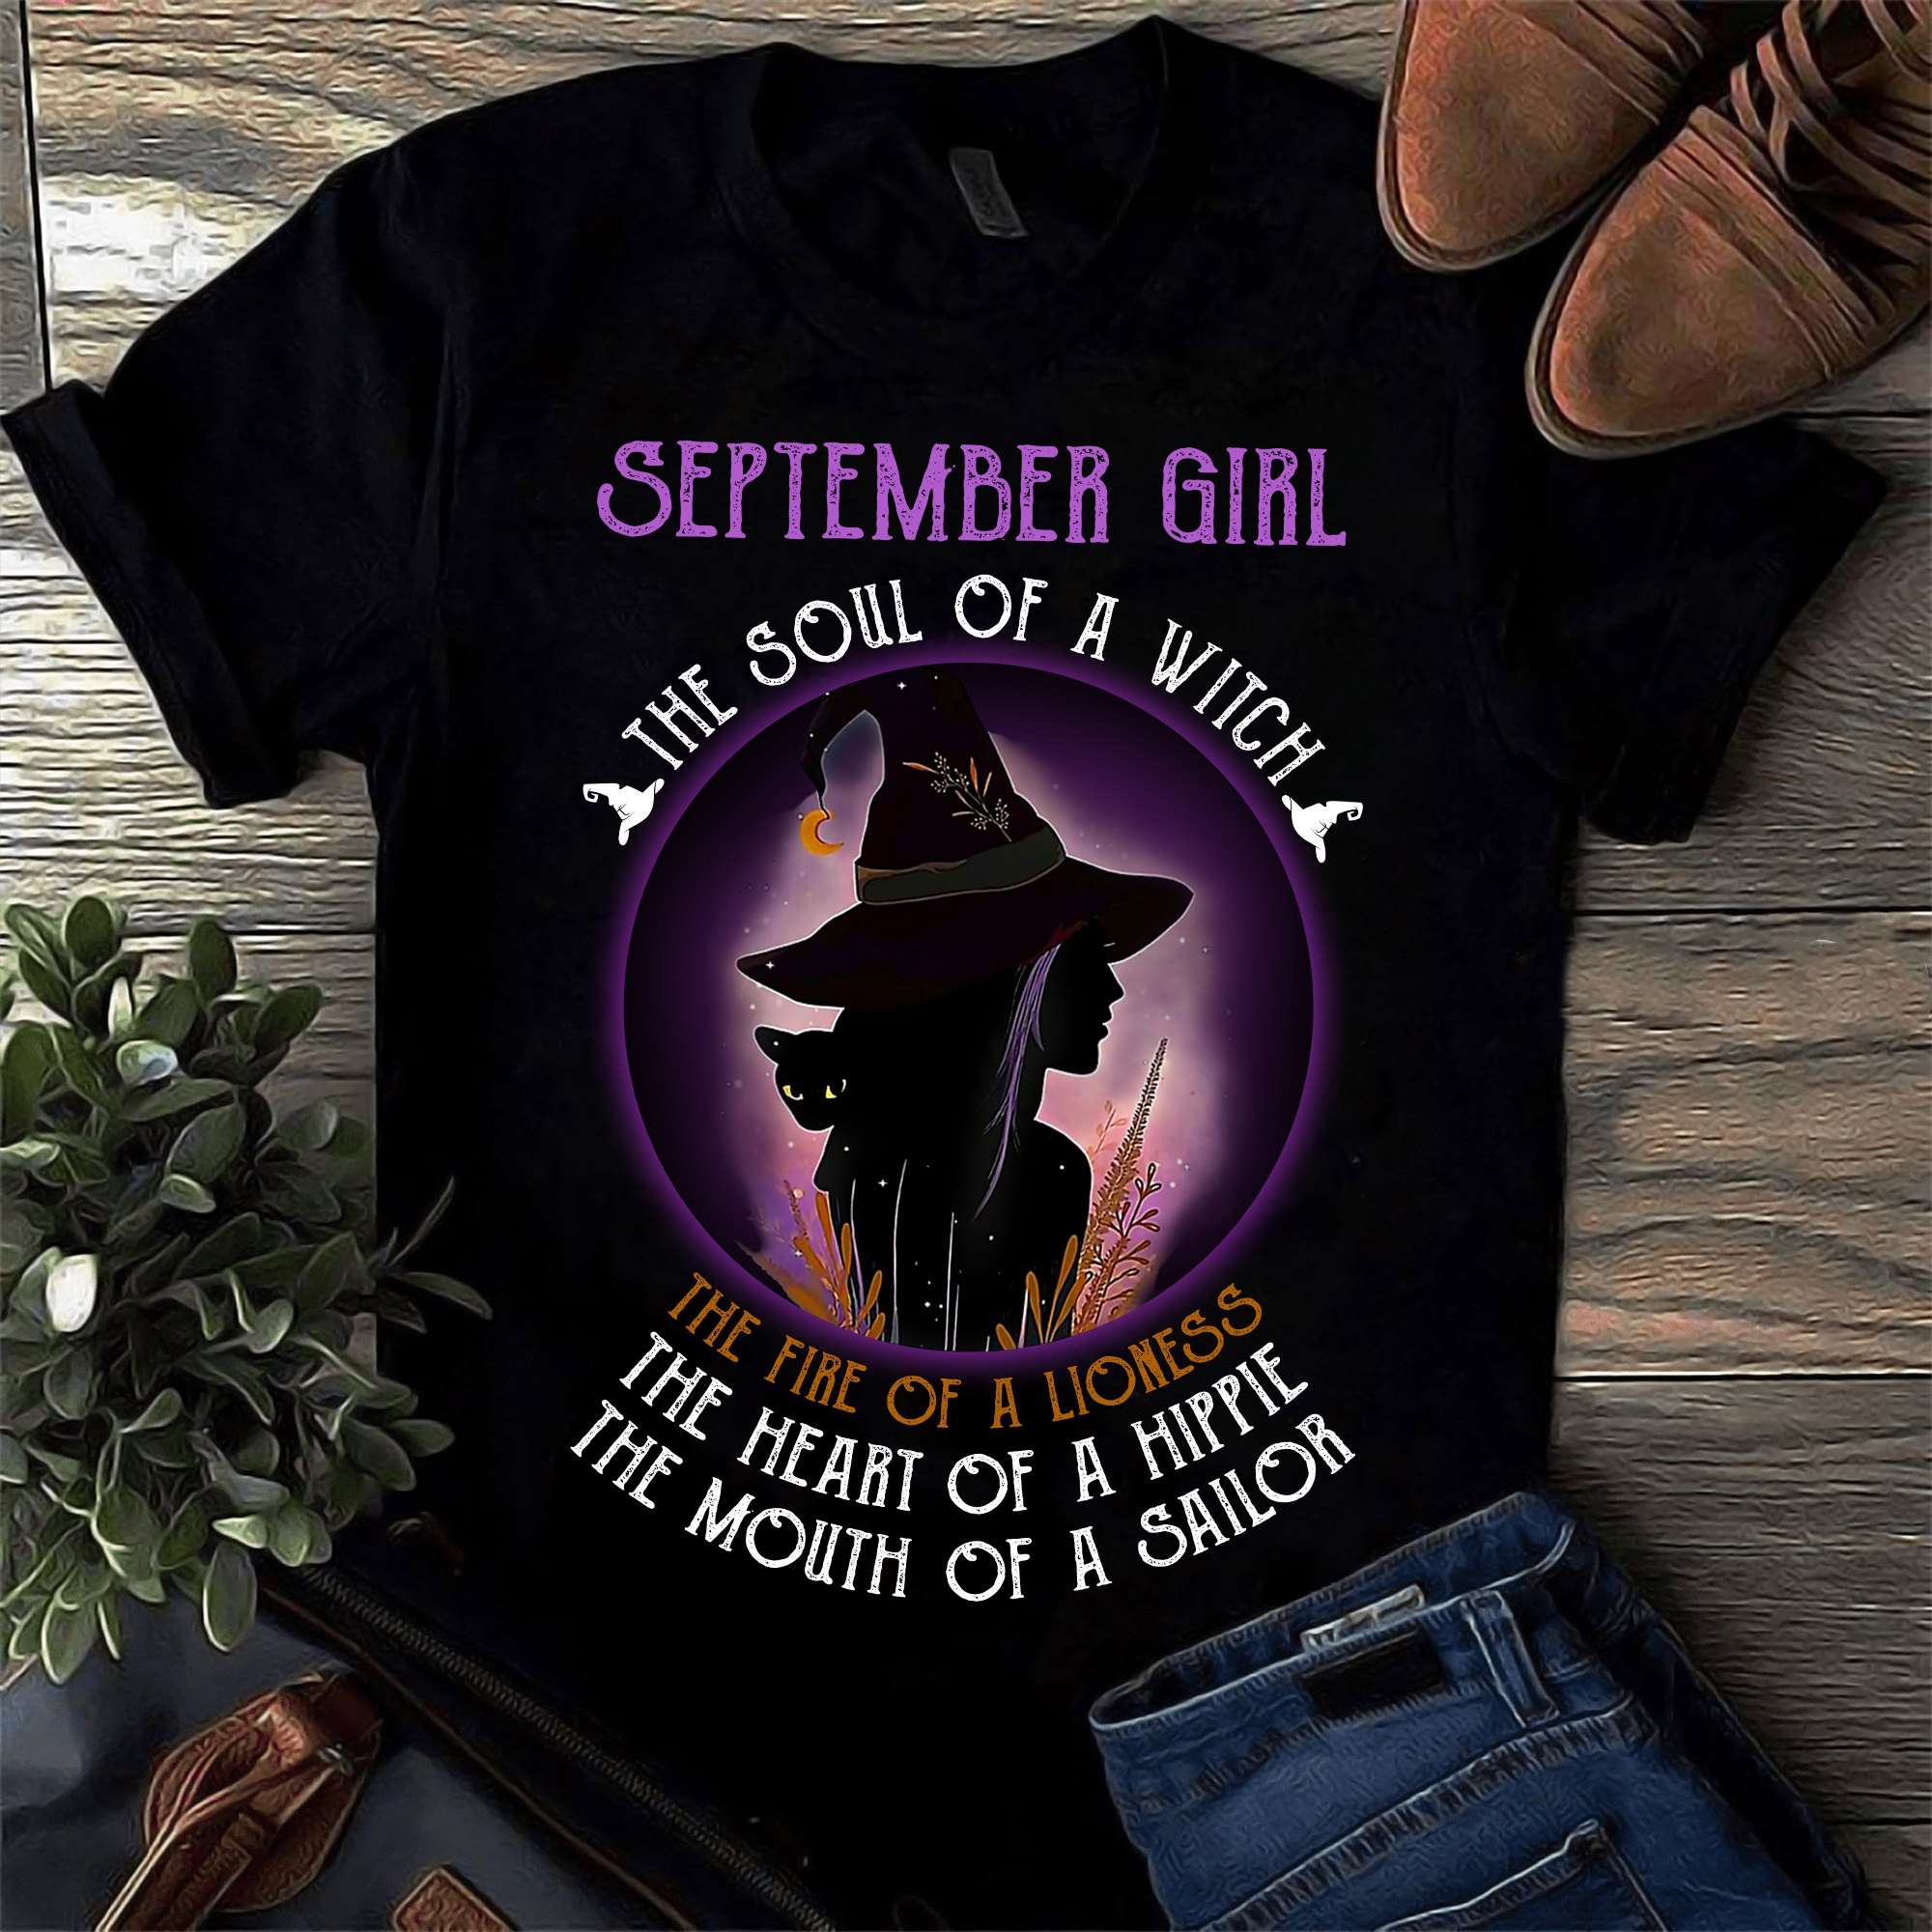 September girl - the soul of a witch, the fire of a lioness, the heart of a hippie, the mouth of a sailor